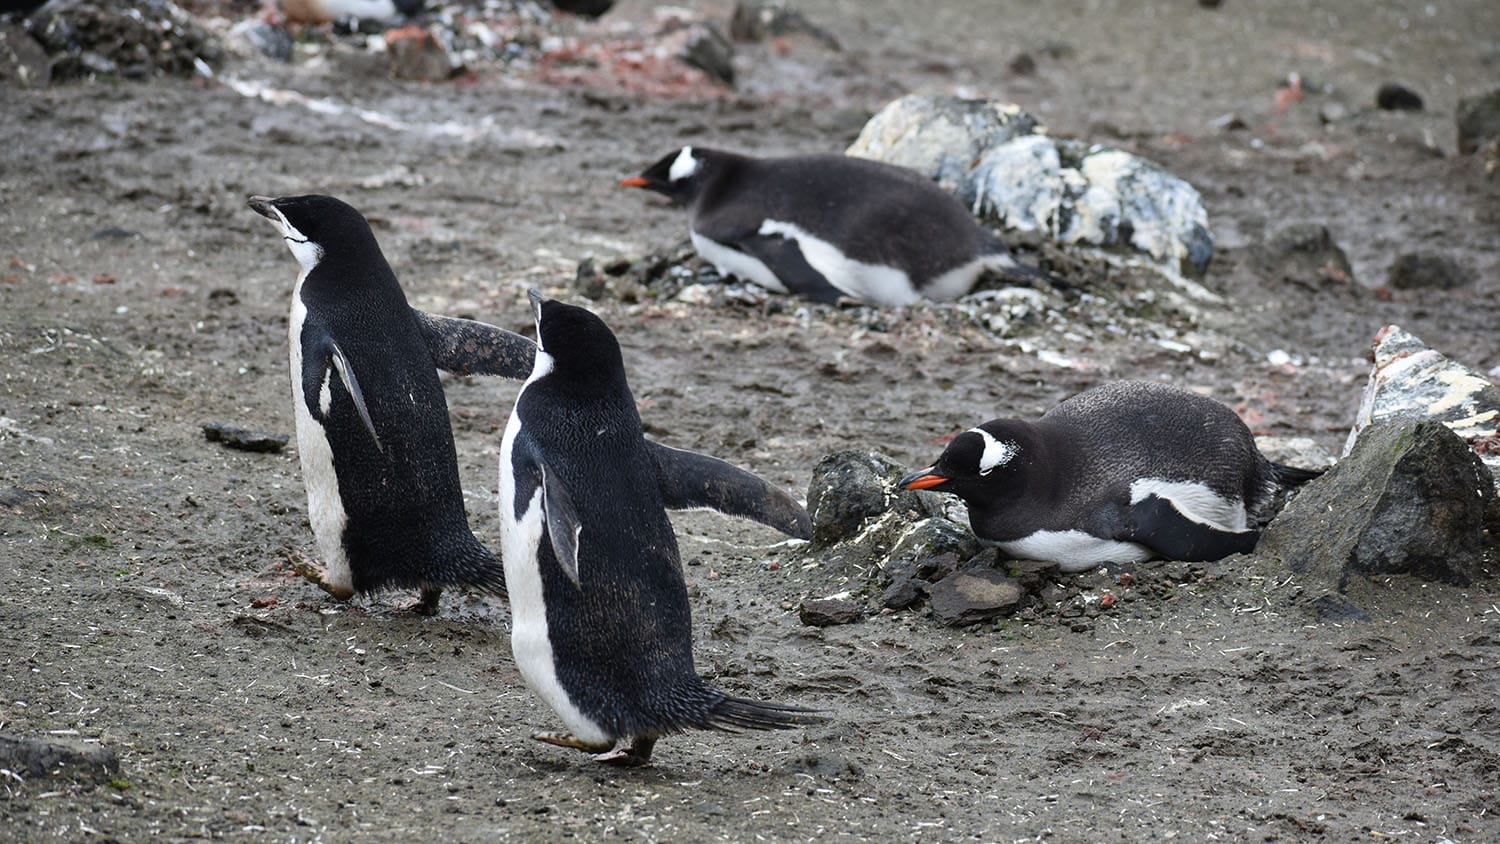 A view of four penguins, some resting, some running about.